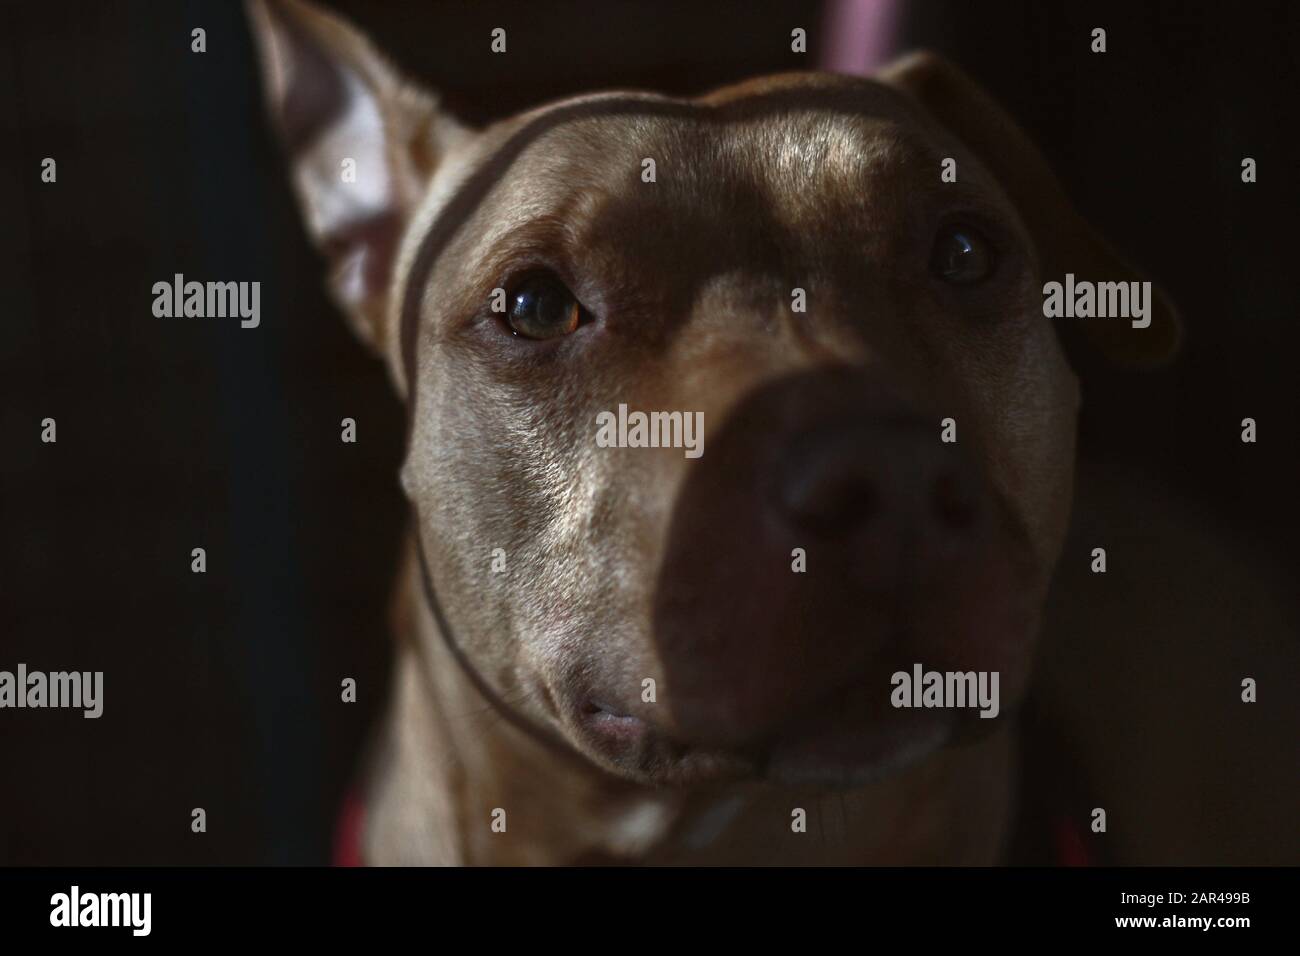 This is a Photo of a Sad Looking Pitbull, to bring awareness to animal abuse  and cruelty. The dog name is Molly, a rescue and success story Stock Photo  - Alamy